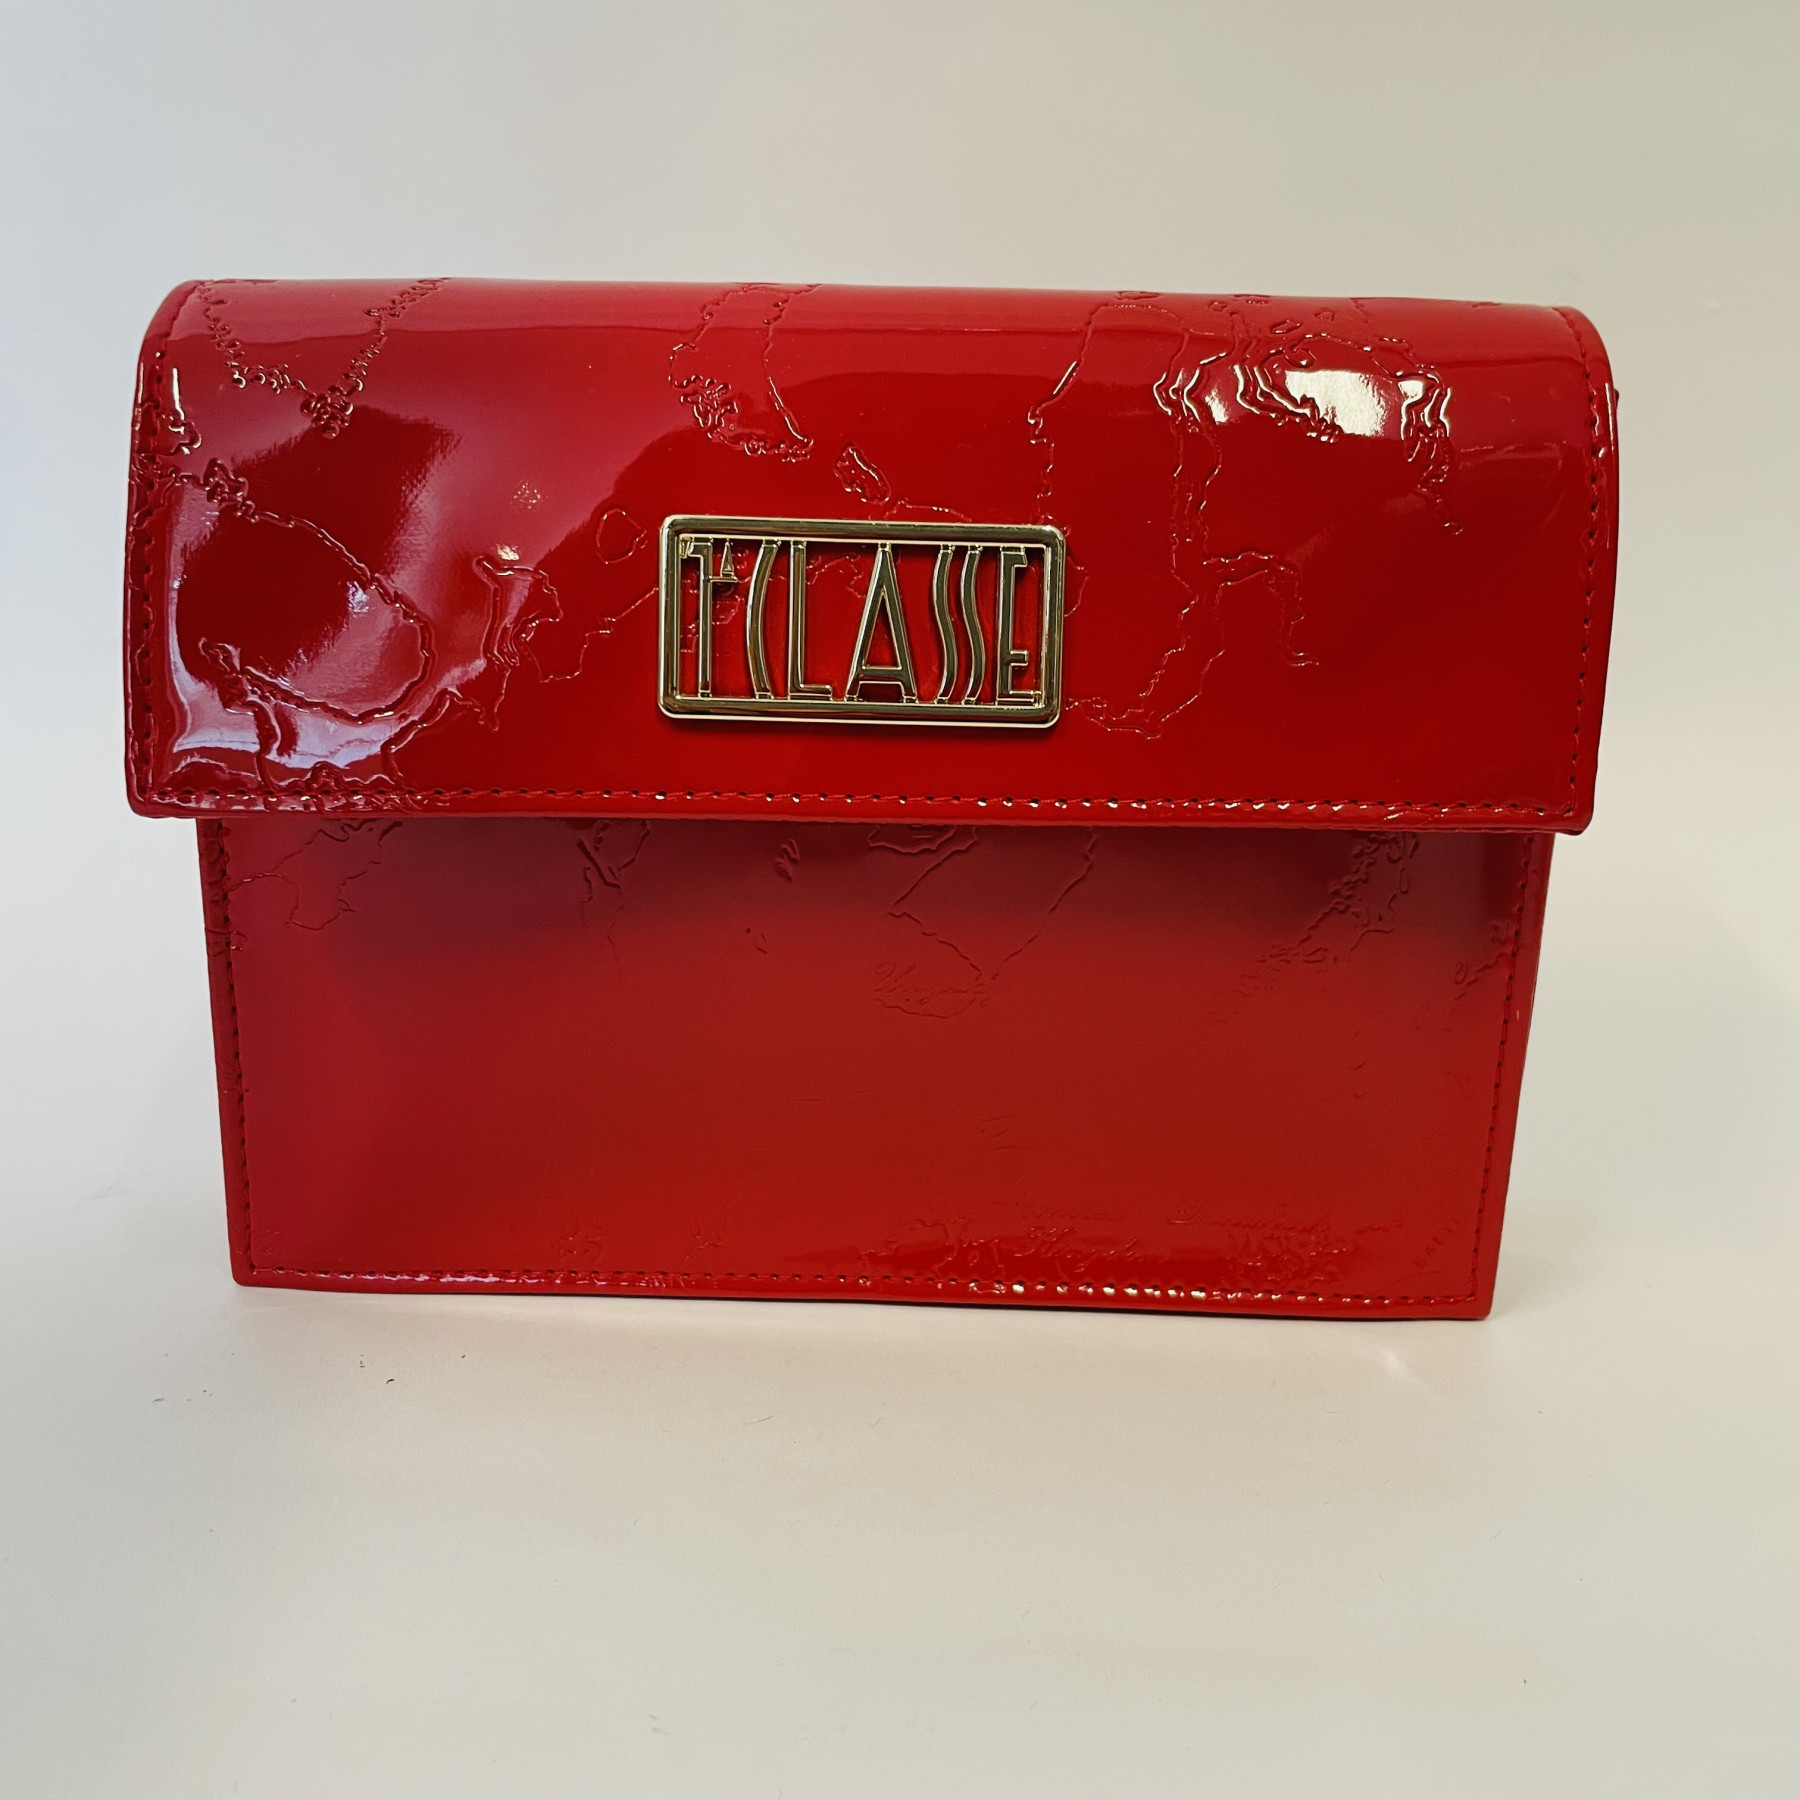 SMALL CASE RUBY RED VERNICE